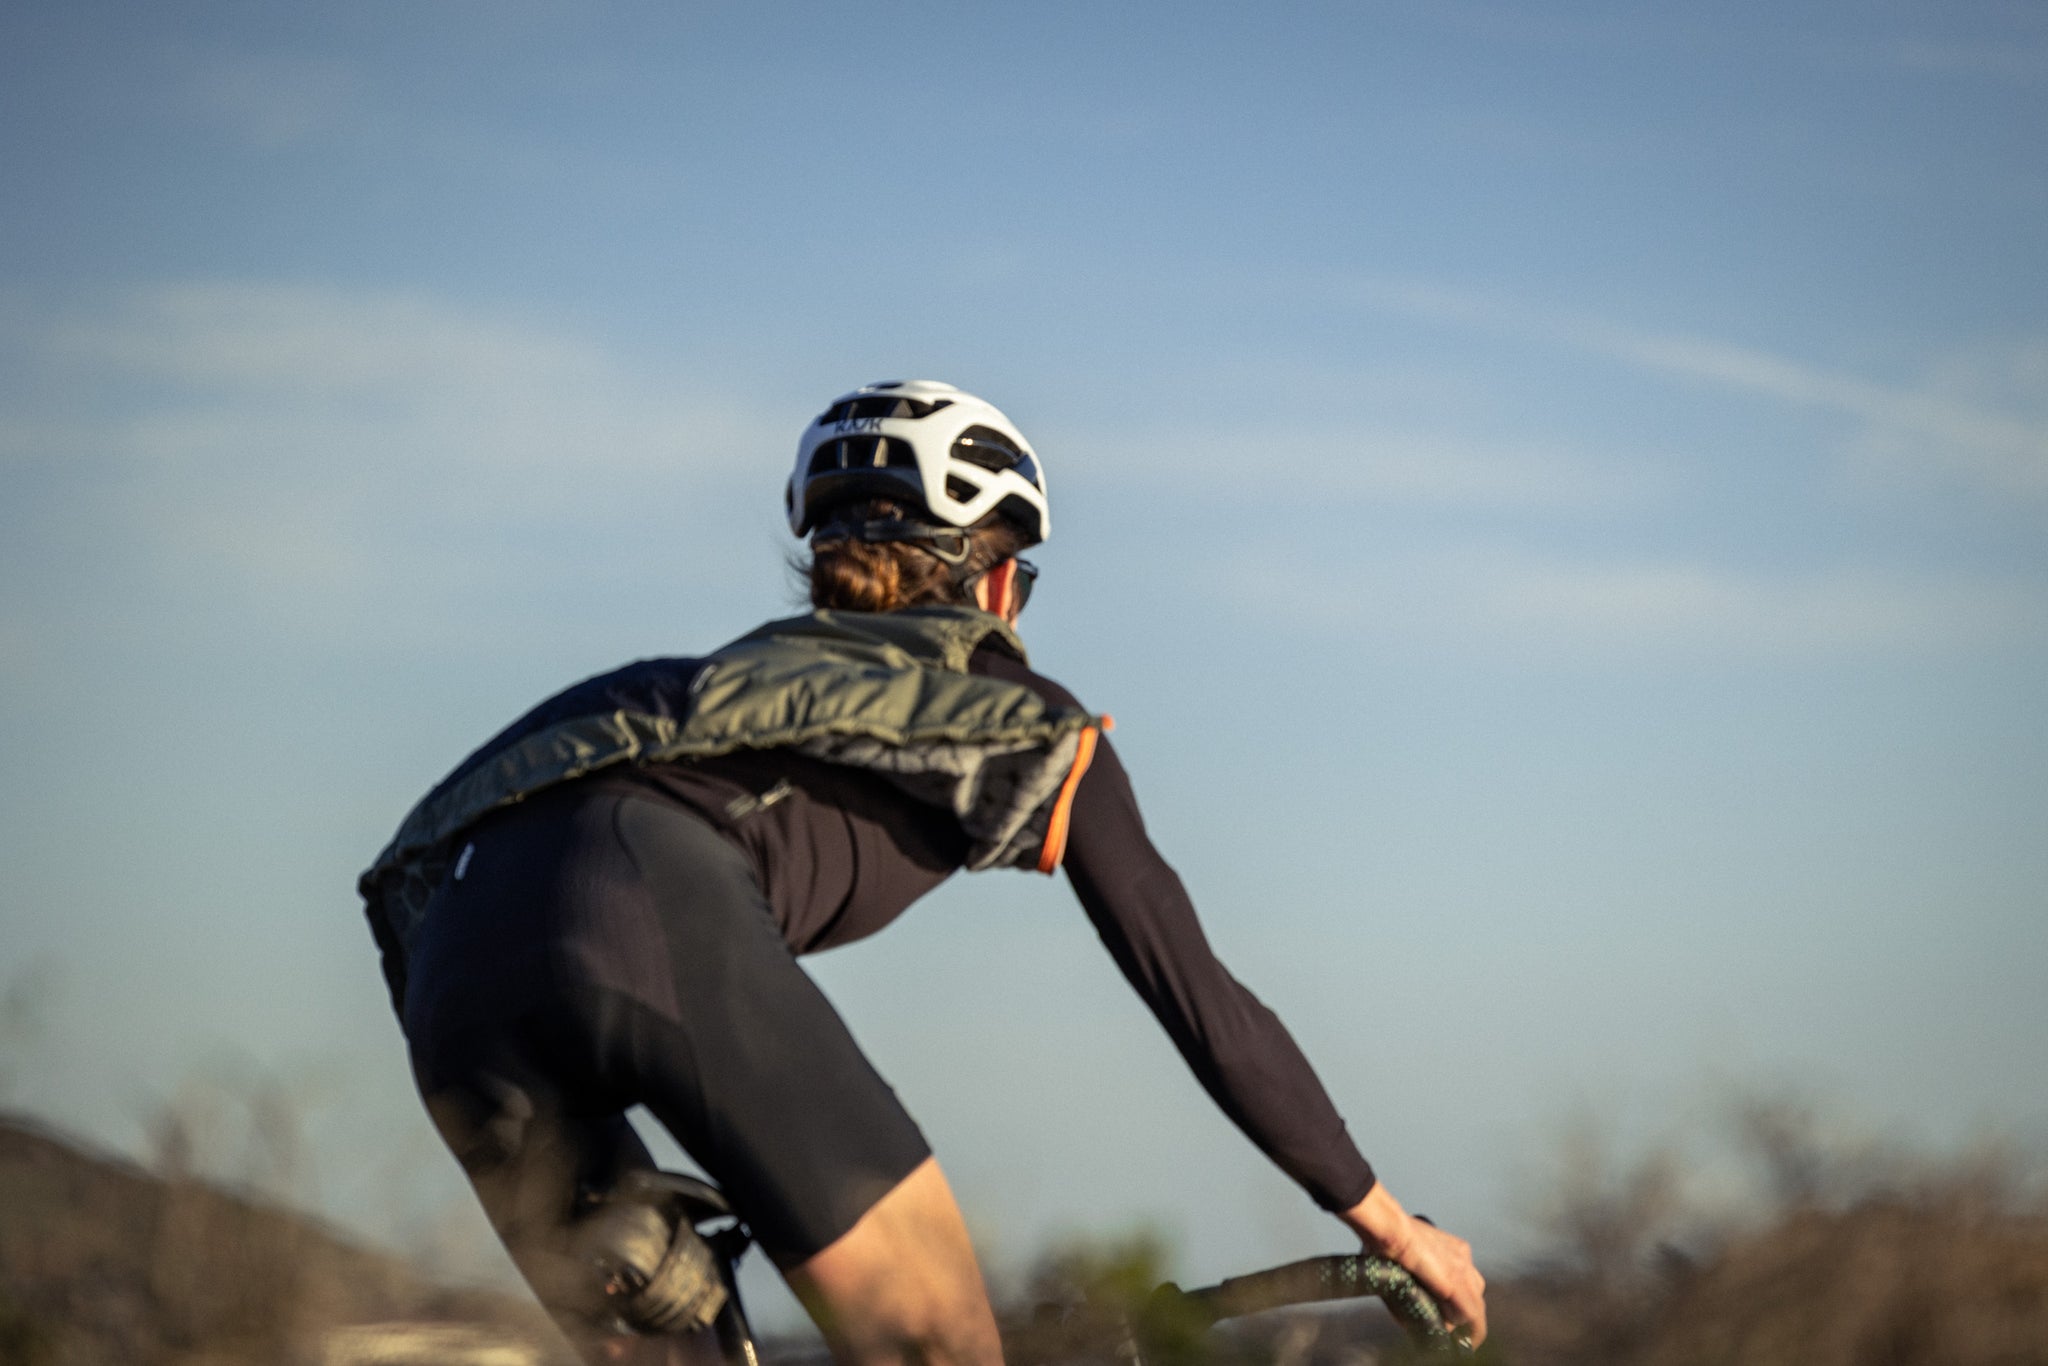 Women's Cycling Clothing, Shop By Adventure